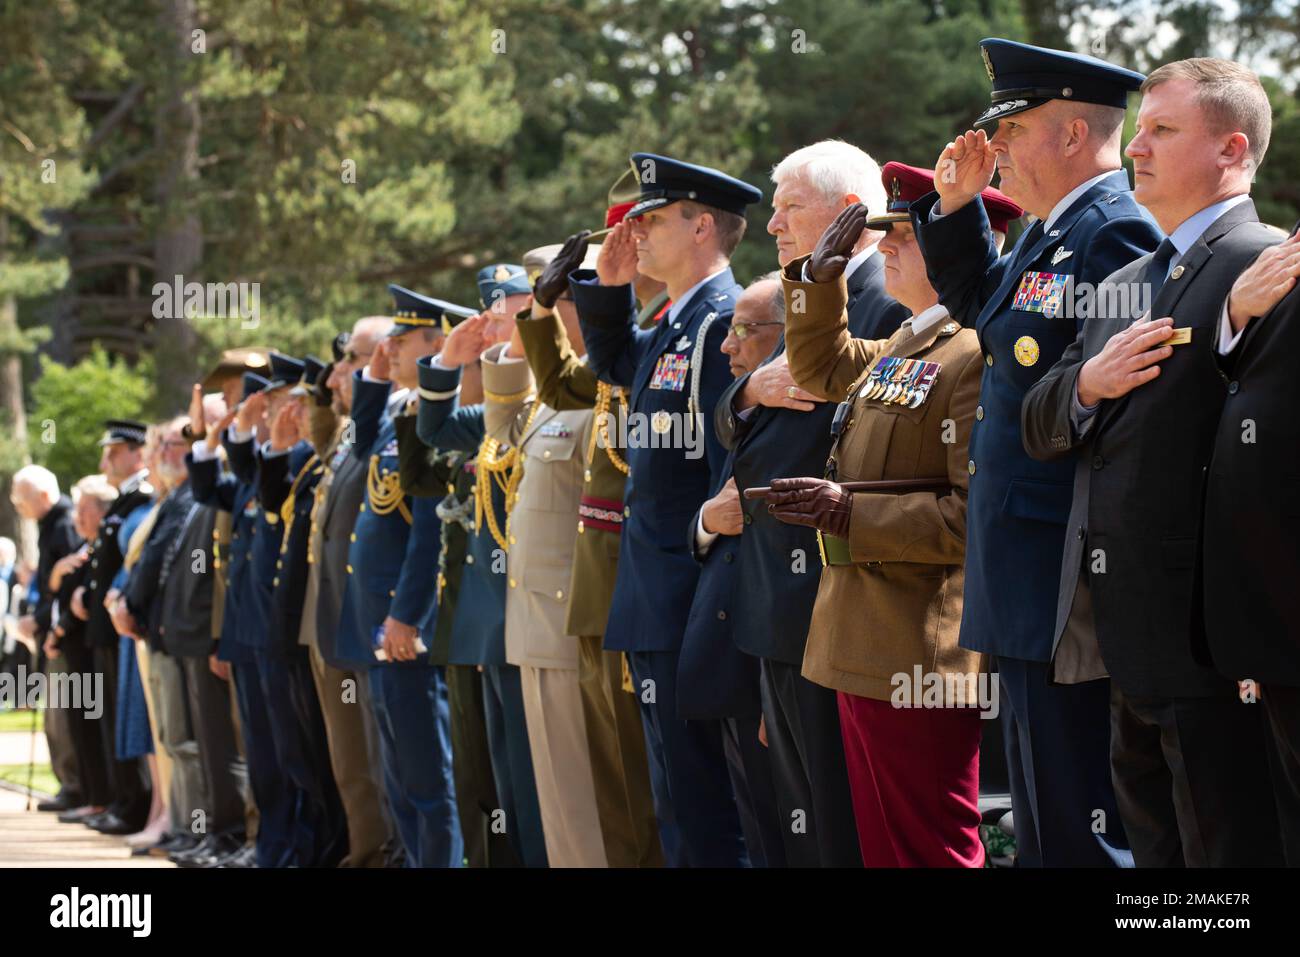 Armed Forces and guests stand for the U.S. national anthem at a Memorial Day ceremony at the Brookwood American Military Cemetery, England, May 29, 2022. Memorial Day provides us a solemn opportunity to remember our fallen brothers and sisters in arms, reflect upon their courageous sacrifice, and show gratitude for the freedom they gave their lives to defend. It also affords us the opportunity to pay homage to those families who lost their loved ones in service to the Nation-and continue to feel the full weight of that sacrifice today. Stock Photo